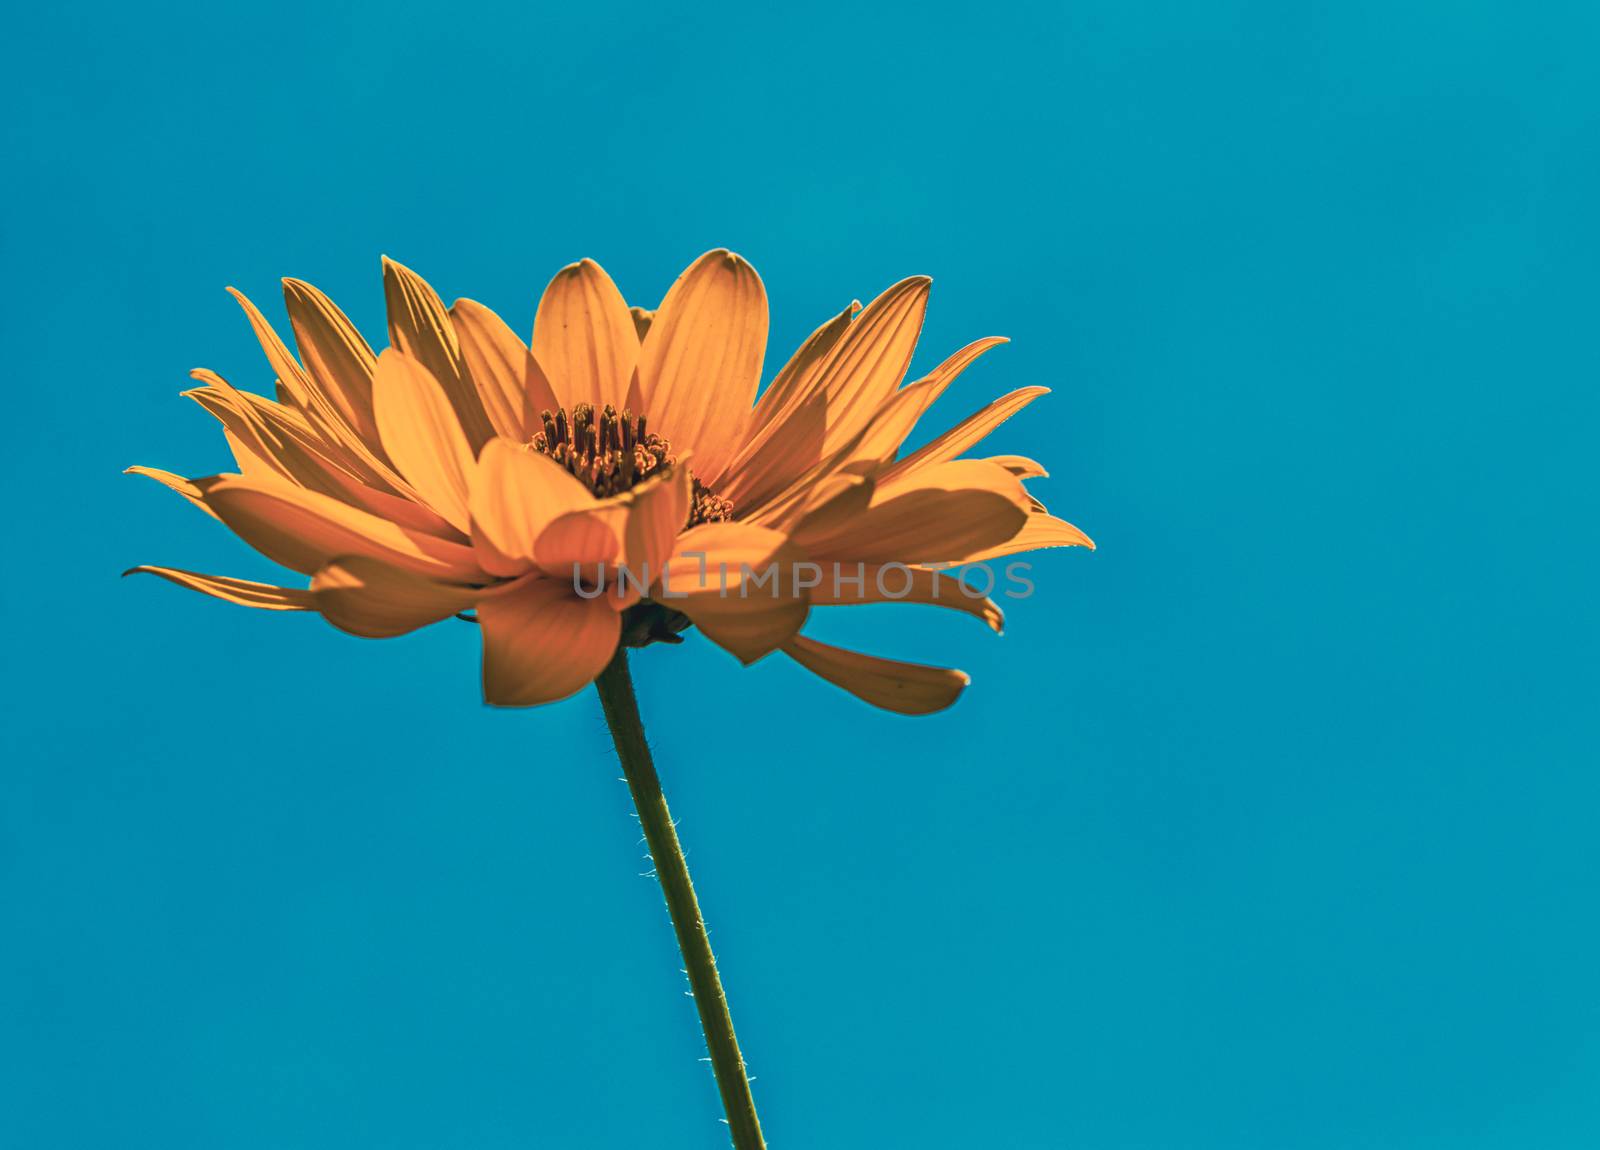 yellow flower on a background of blue sky by Gera8th